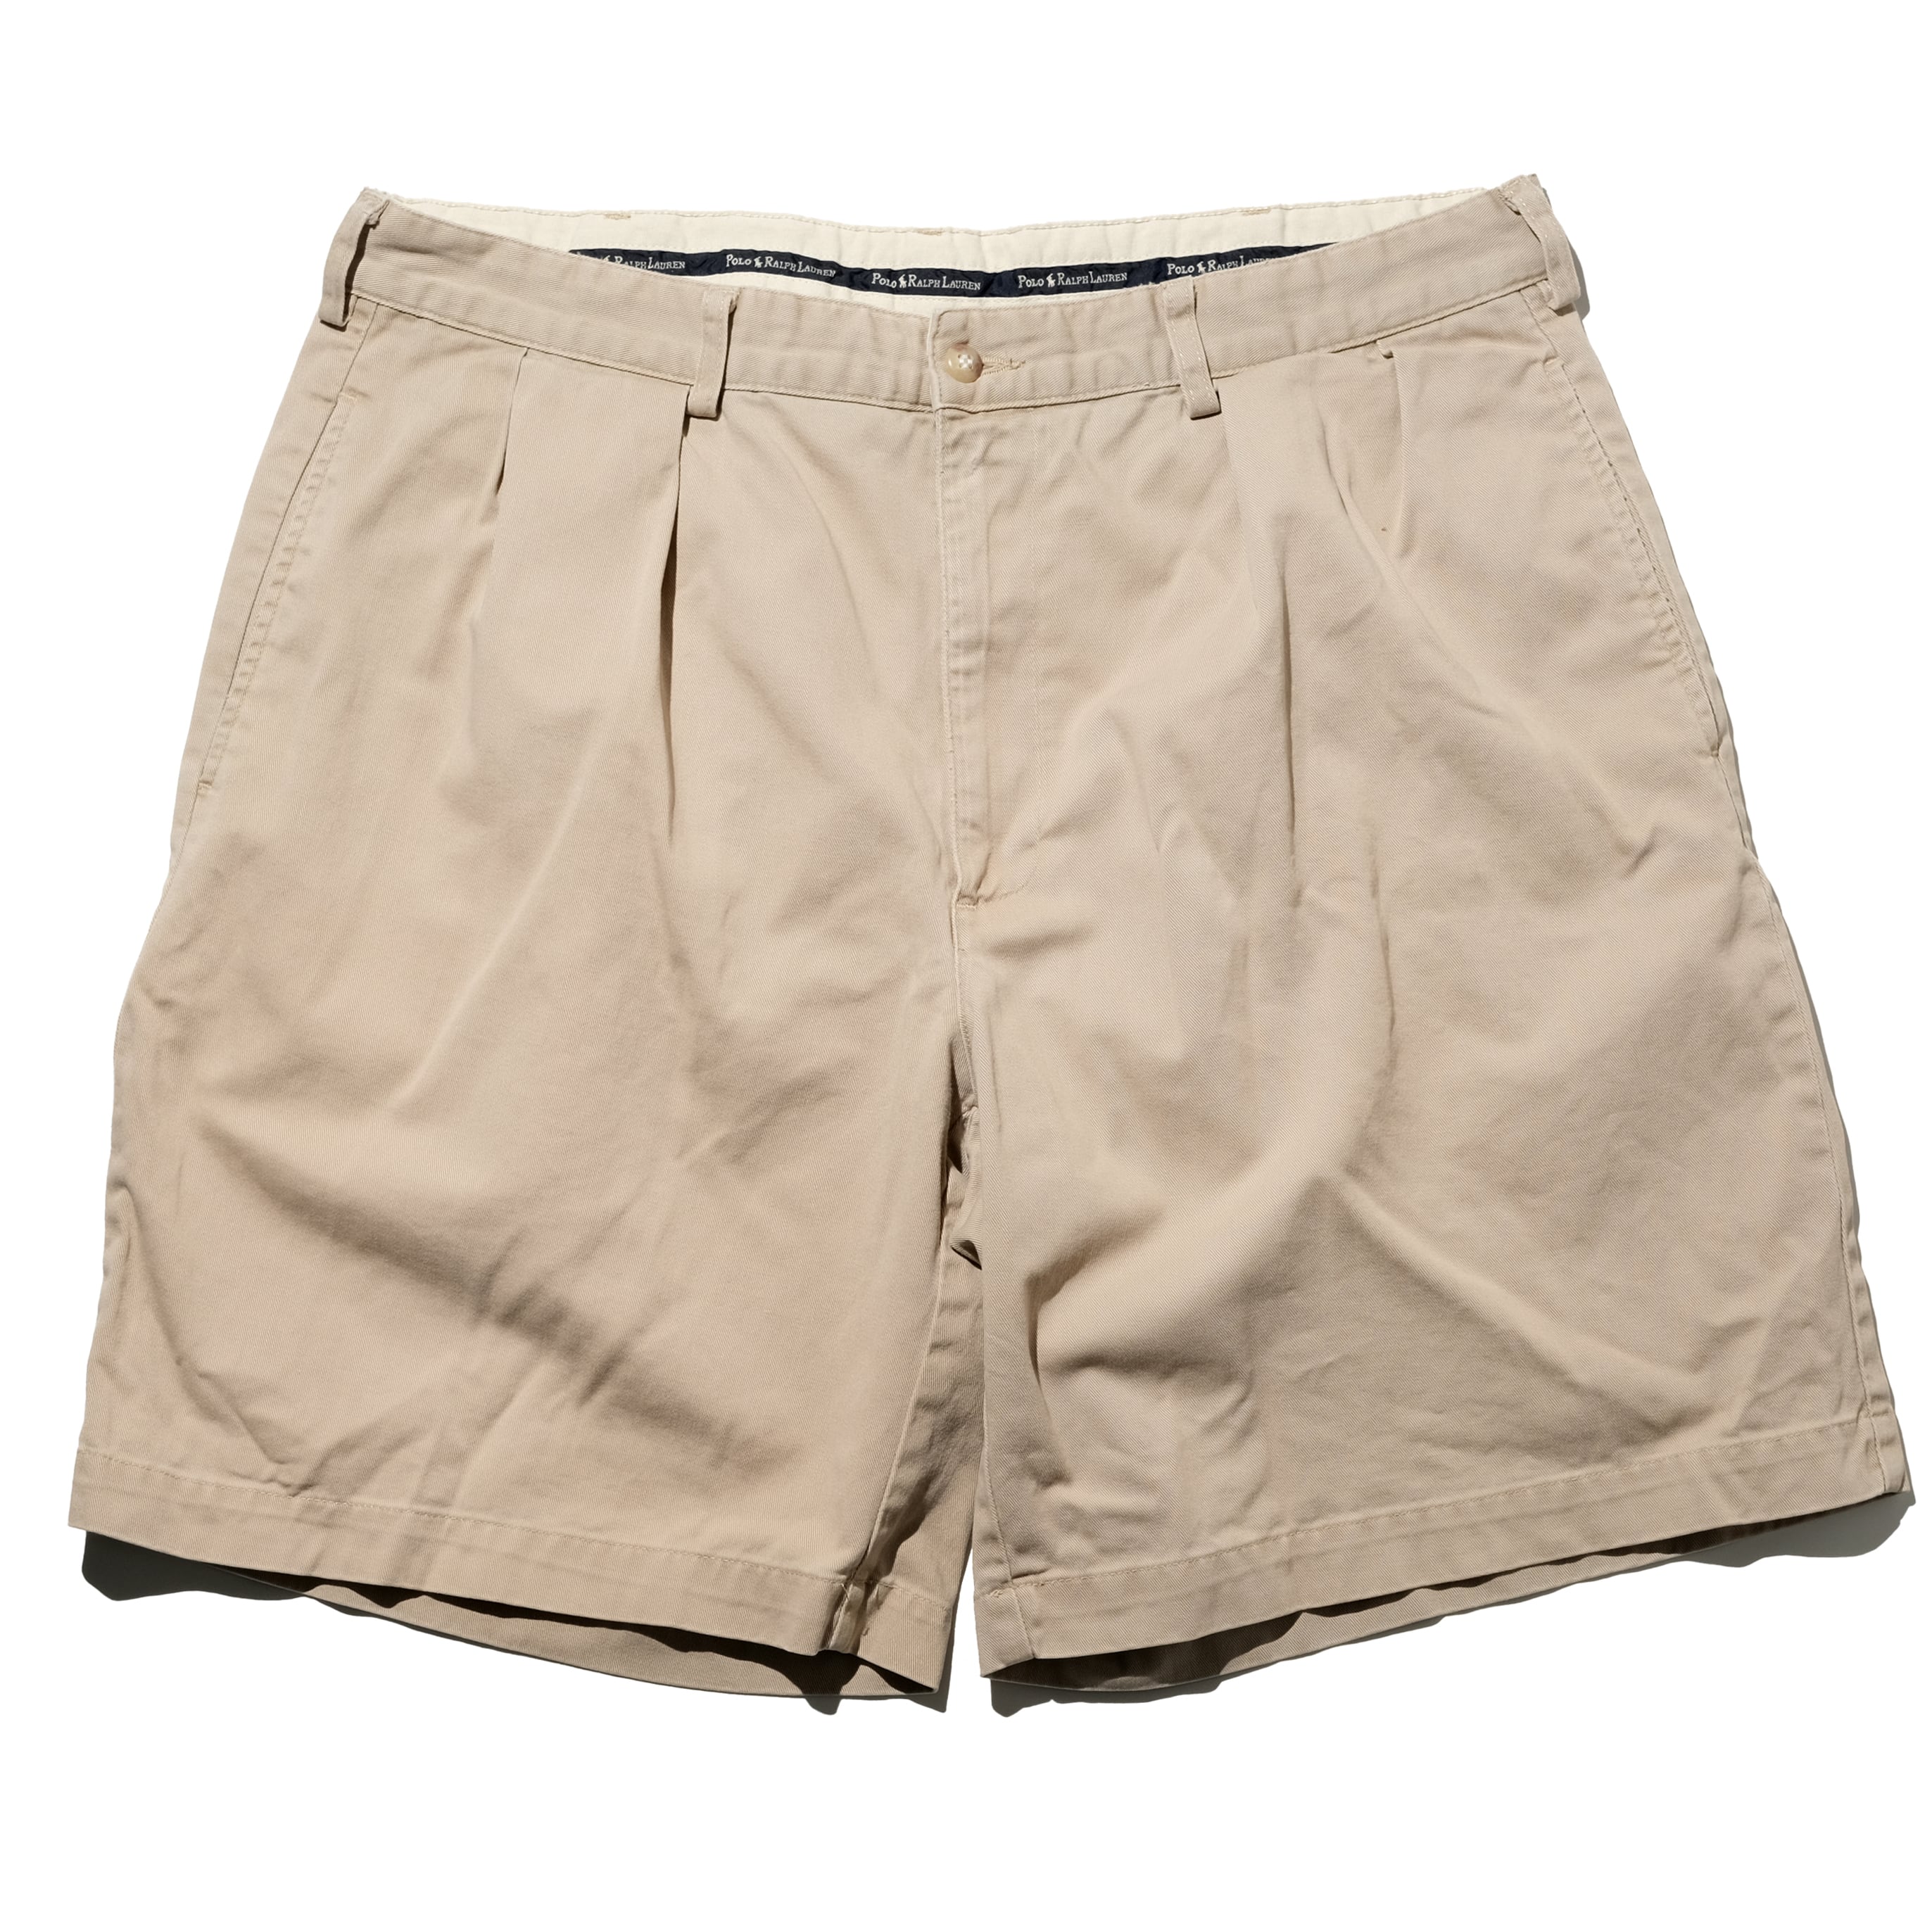 90's Polo by Ralph Lauren 2 tuck chino shorts 